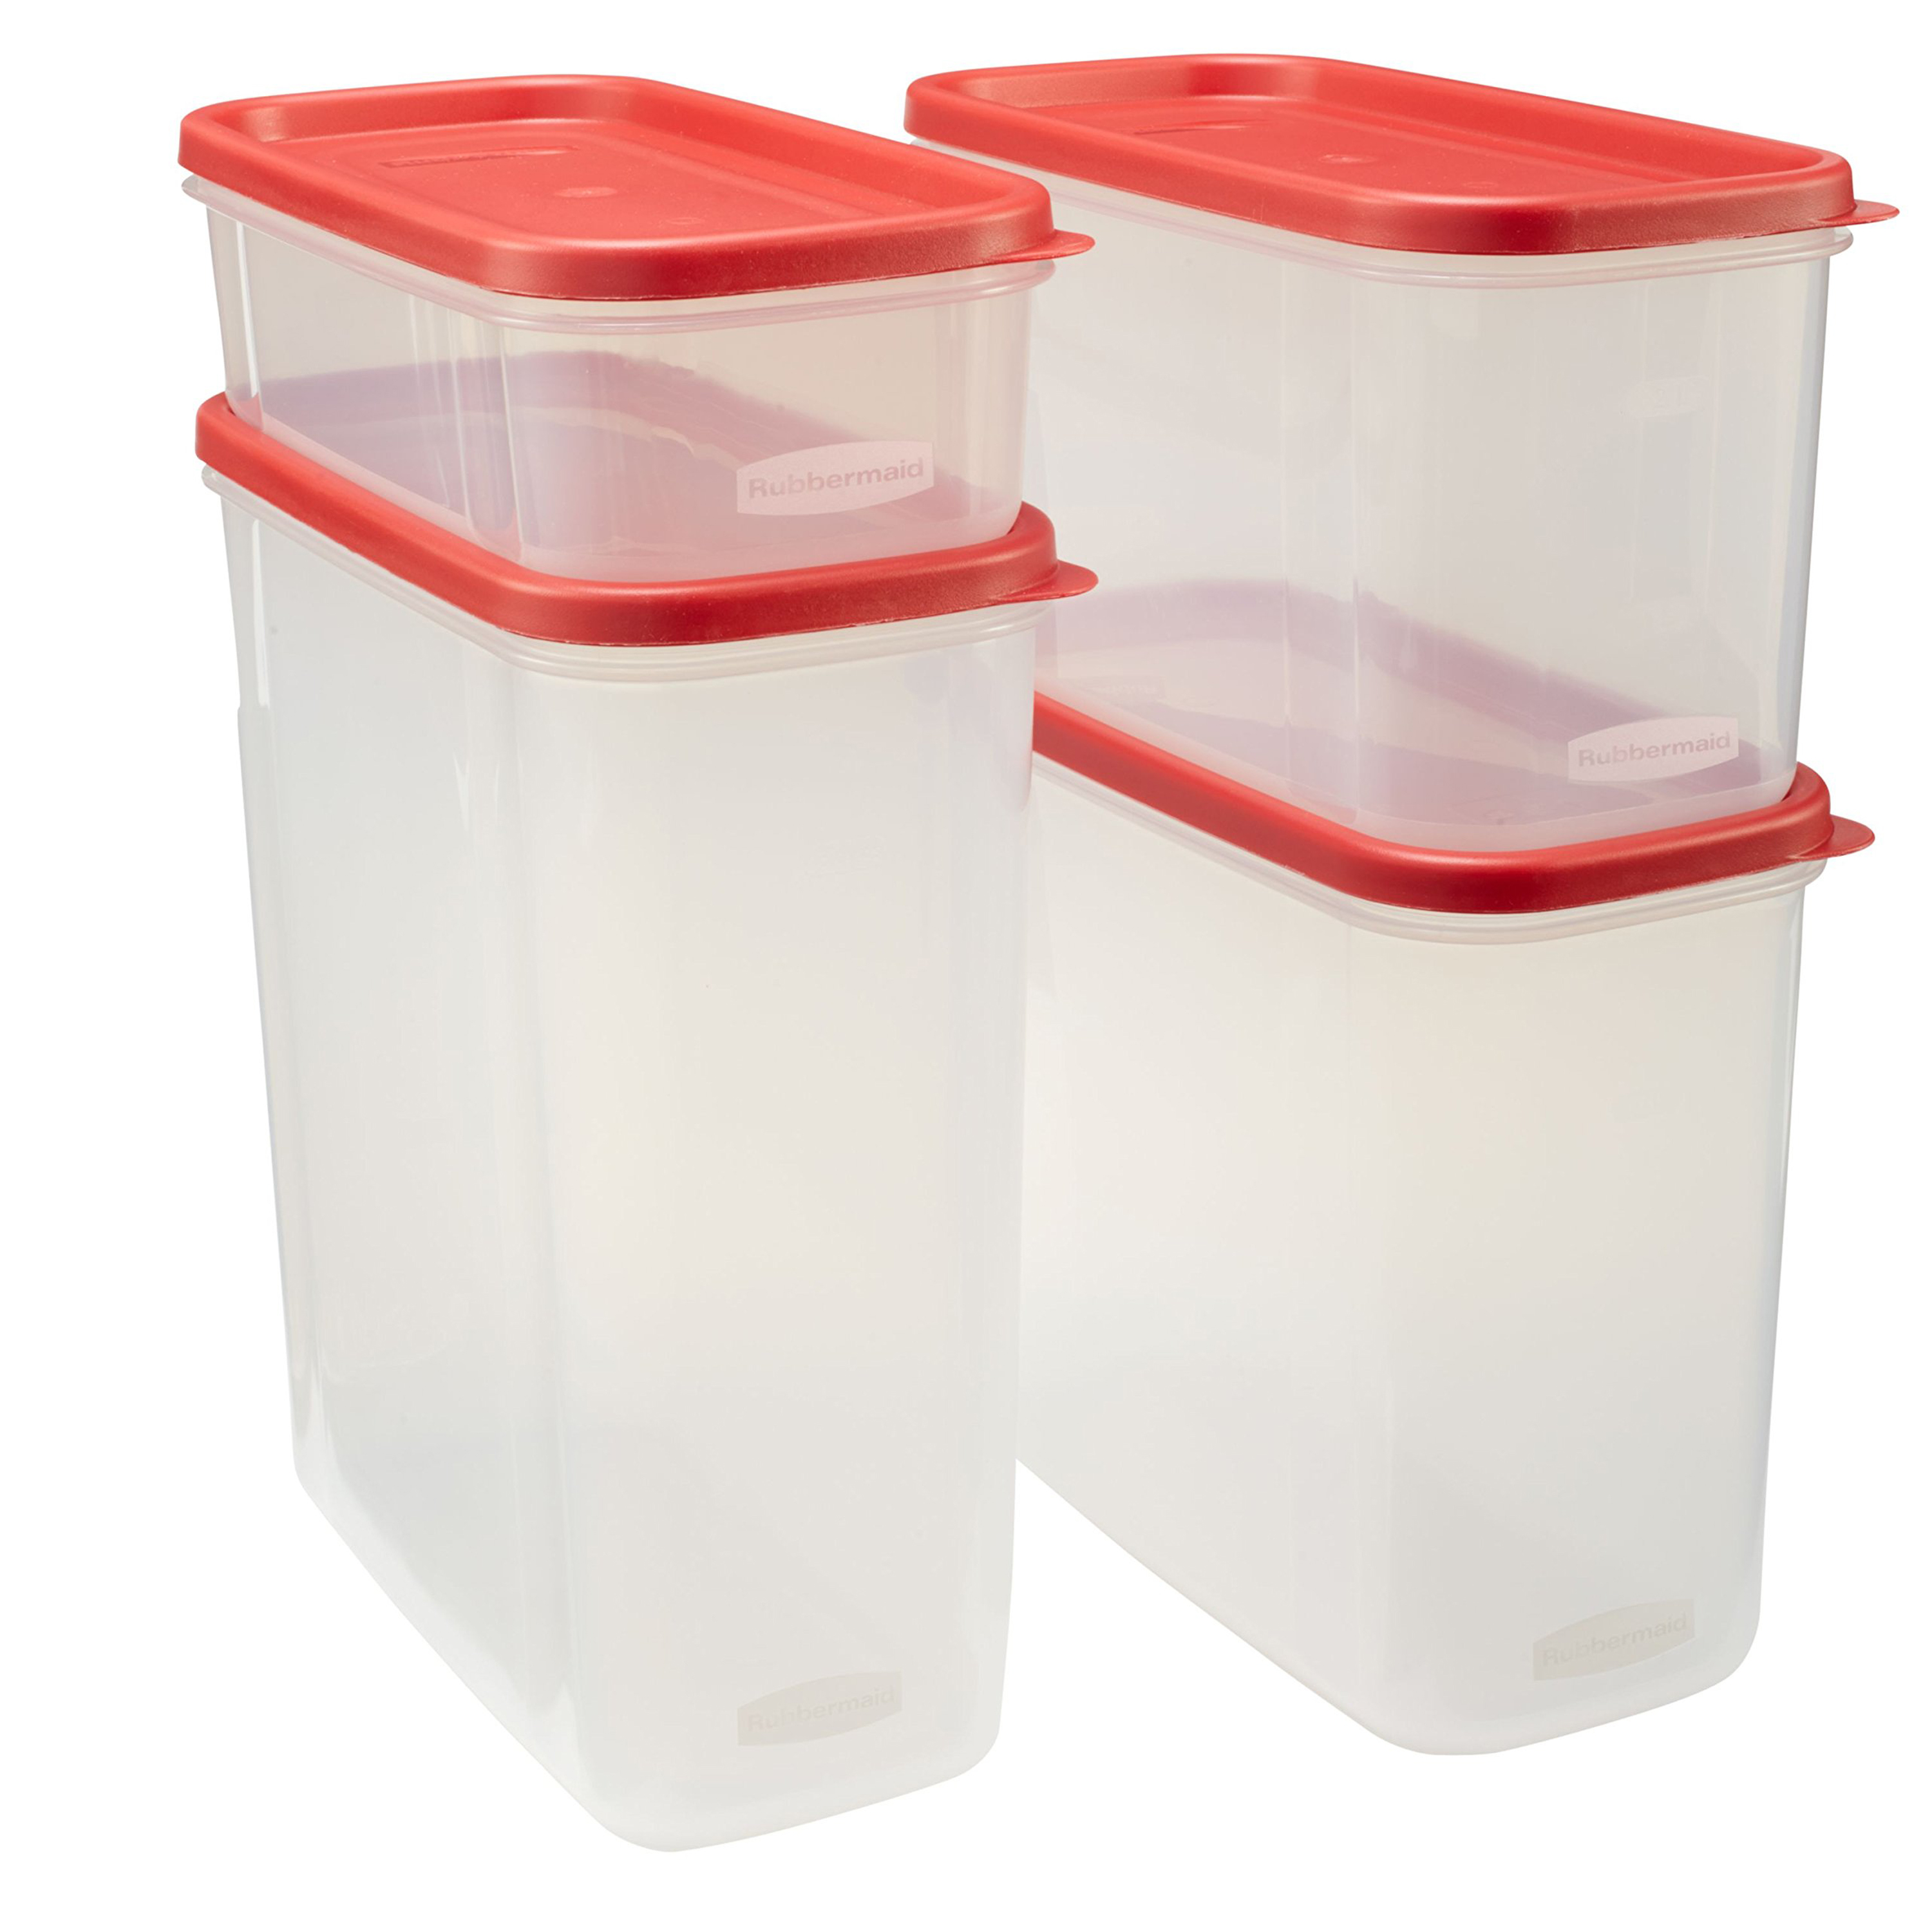 Rubbermaid Modular Pantry Canister Set, 8pcs - image 1 of 12